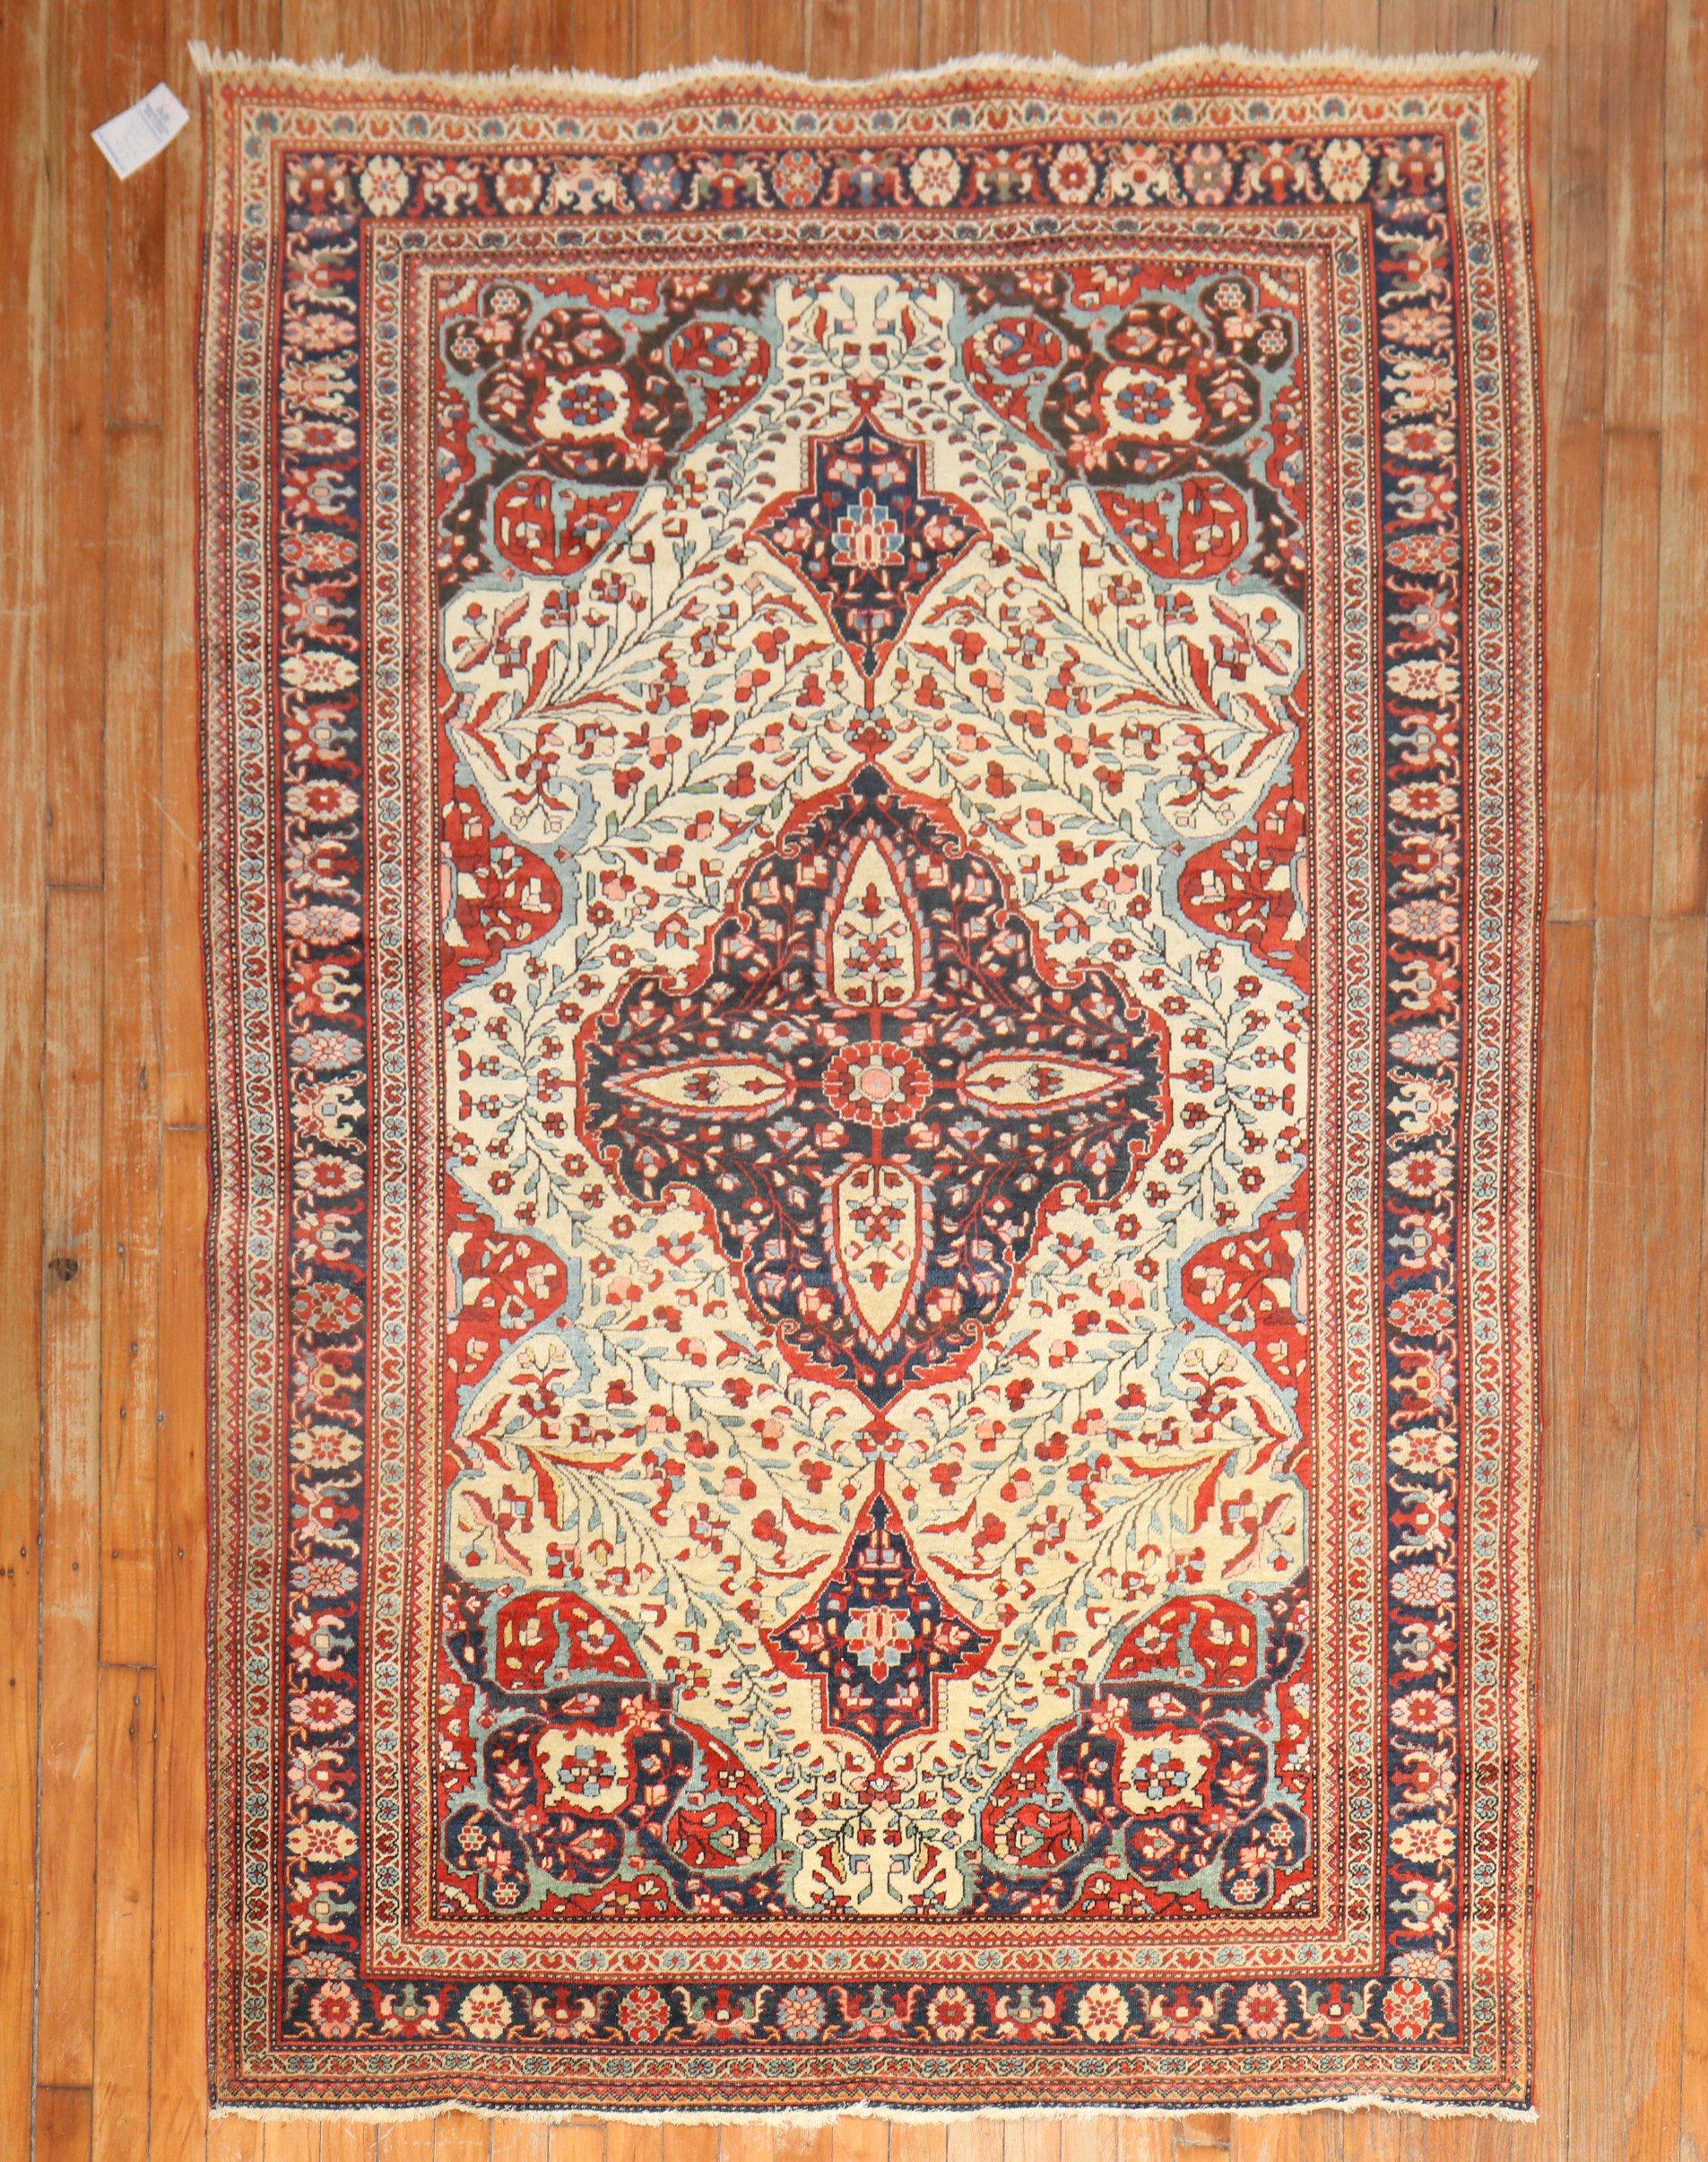 Timeless and priceless best describes this authentic Persian Sarouk Ferehan rug from the late 19th century.

Measures: 4'5'' x 7'.